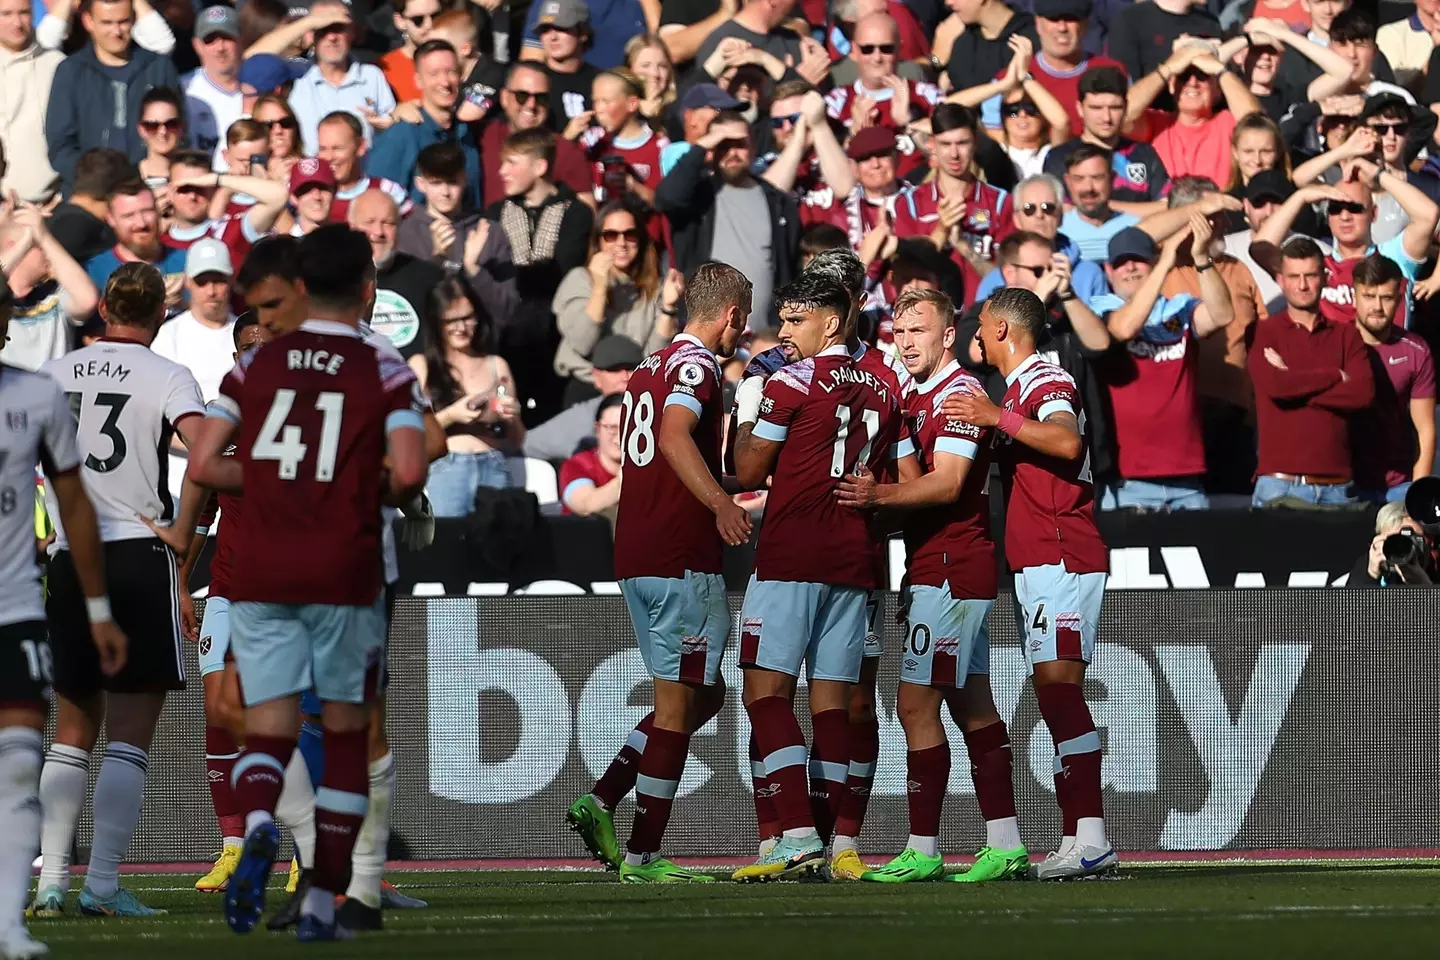 West Ham, whose fixture could be affected by the coronation, celebrate a goal [Image